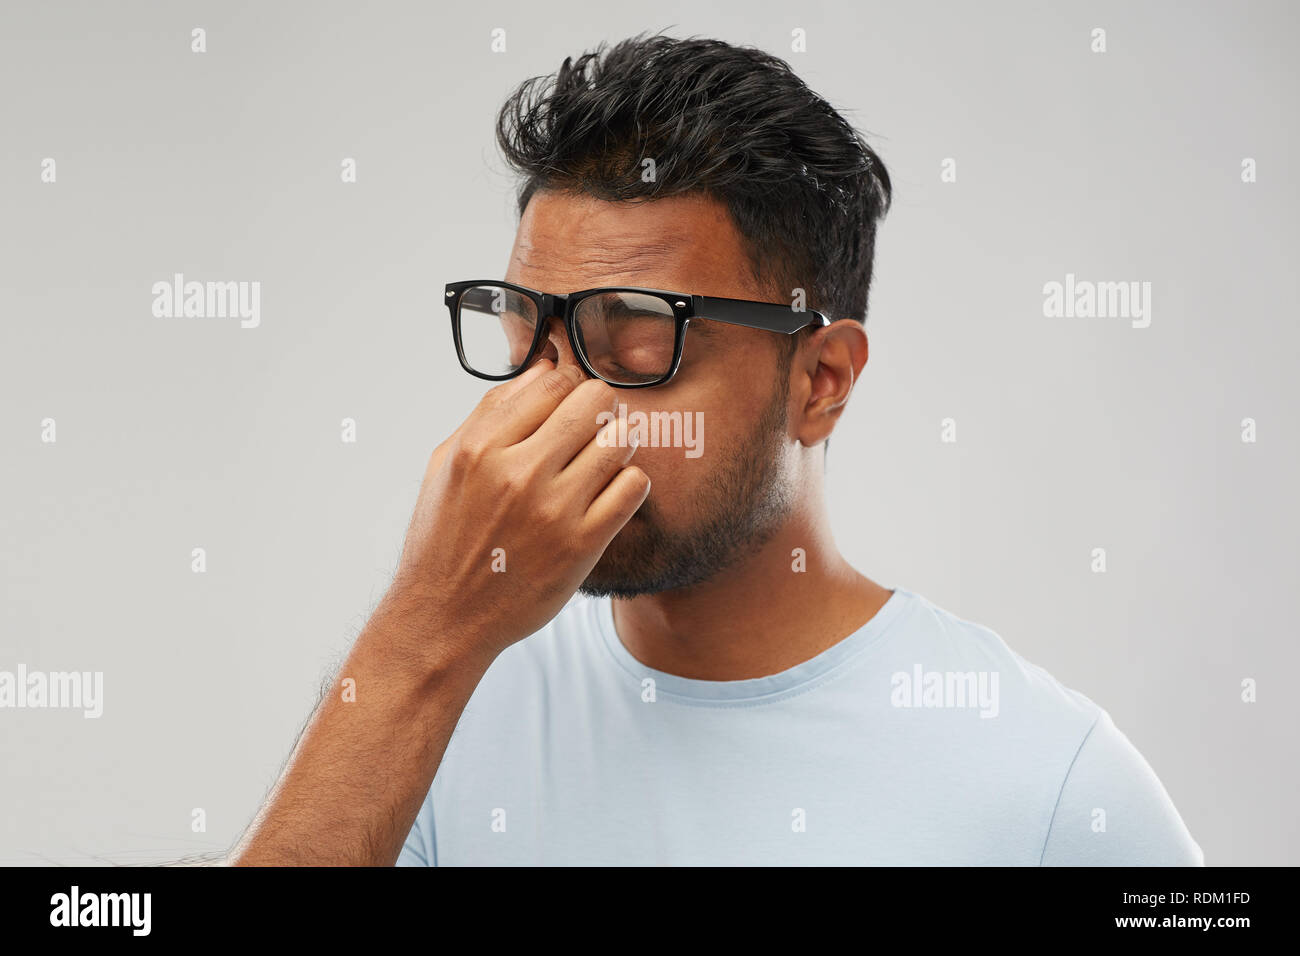 tired indian man in glasses rubbing nose bridge Stock Photo